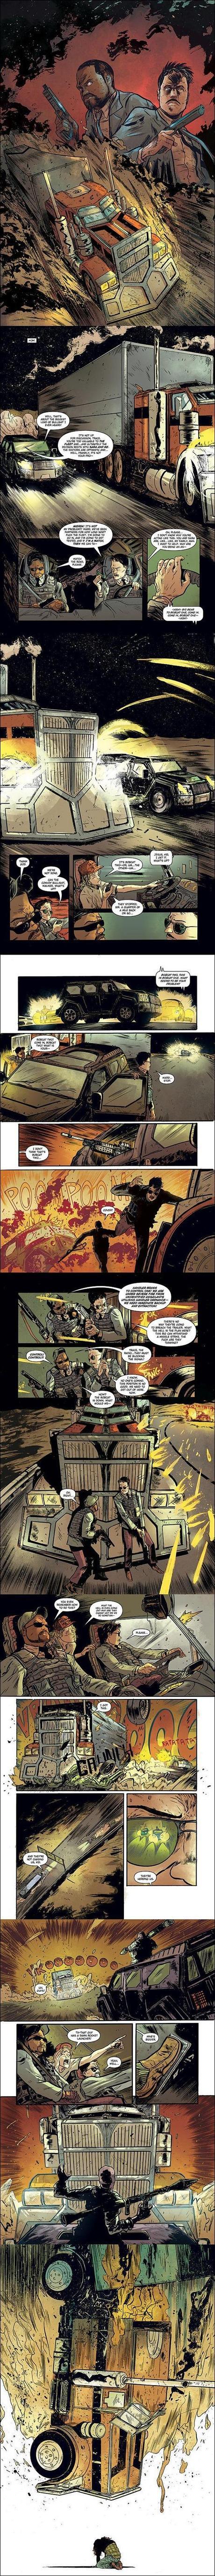 The Ghost Fleet #1 Preview